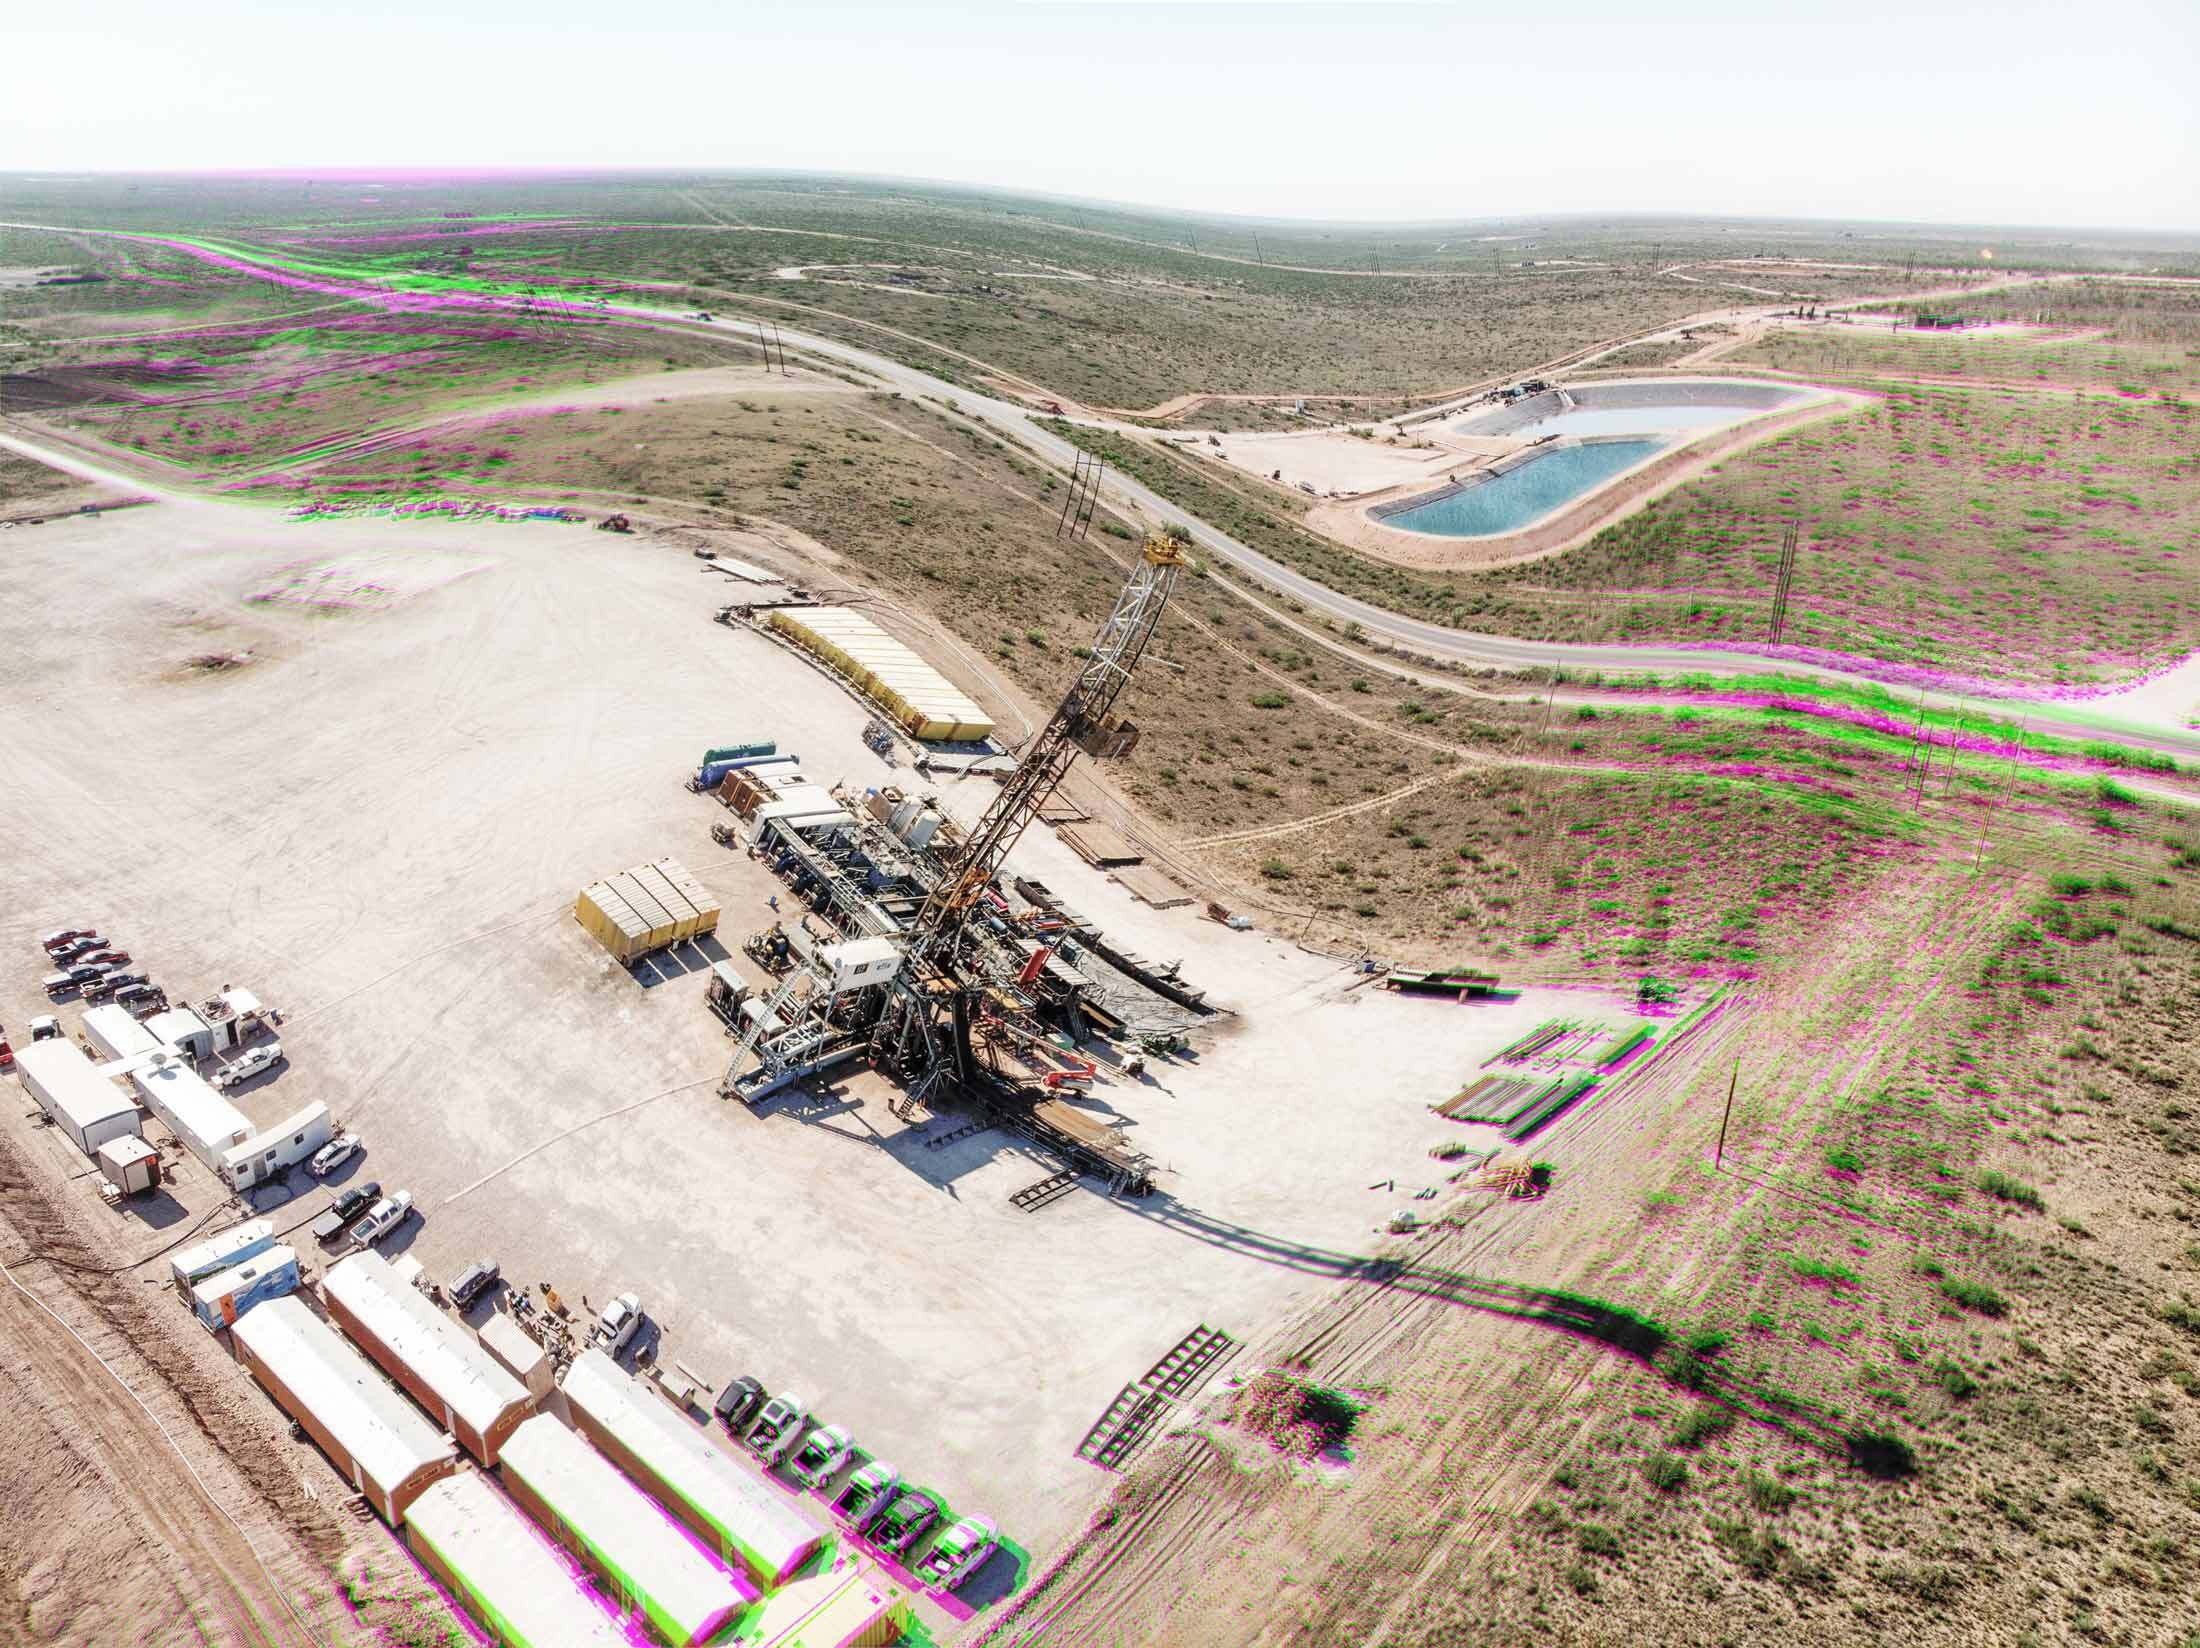 Drone view of an oil and gas drill rig in West Texas, near Pecos.